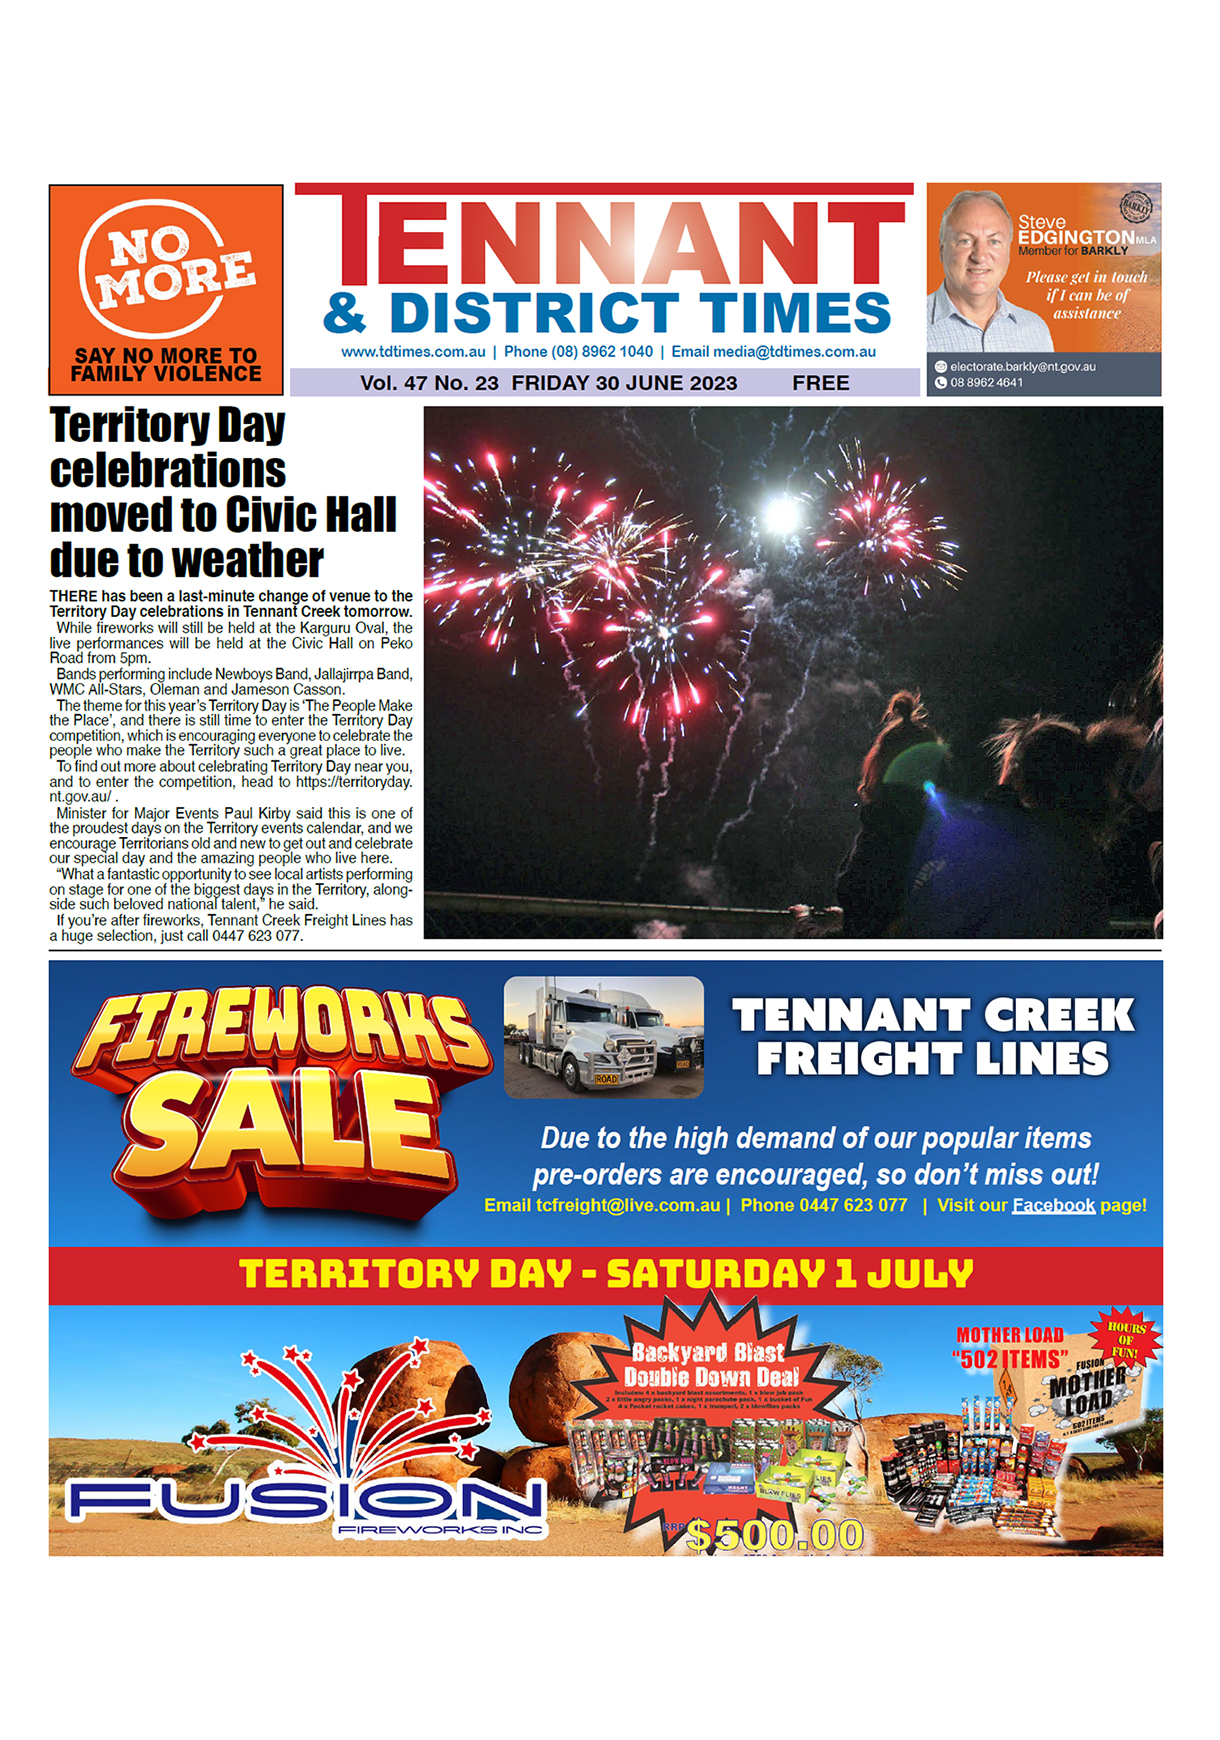 Tennant & District Times 30 June 2023